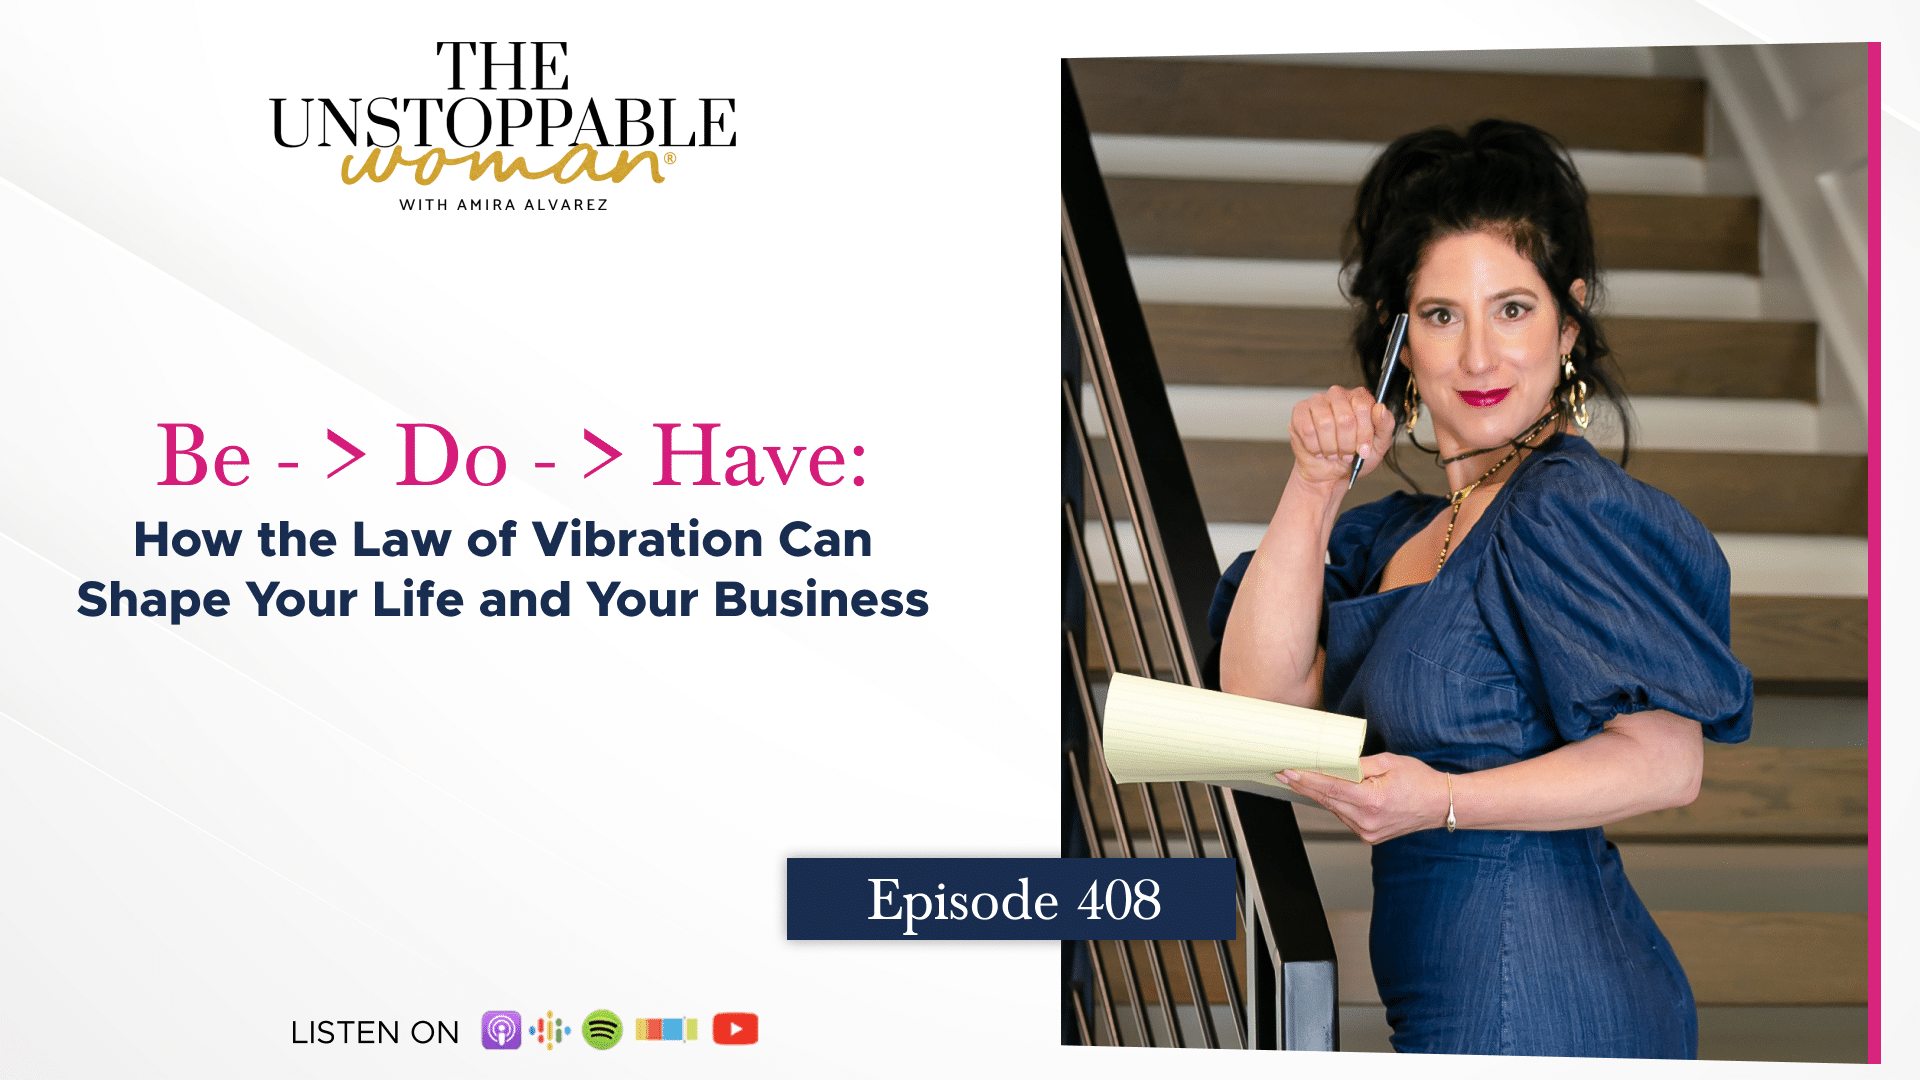 [Image: Be - > Do - > Have: How the Law of Vibration Can Shape Your Life and Your Business]